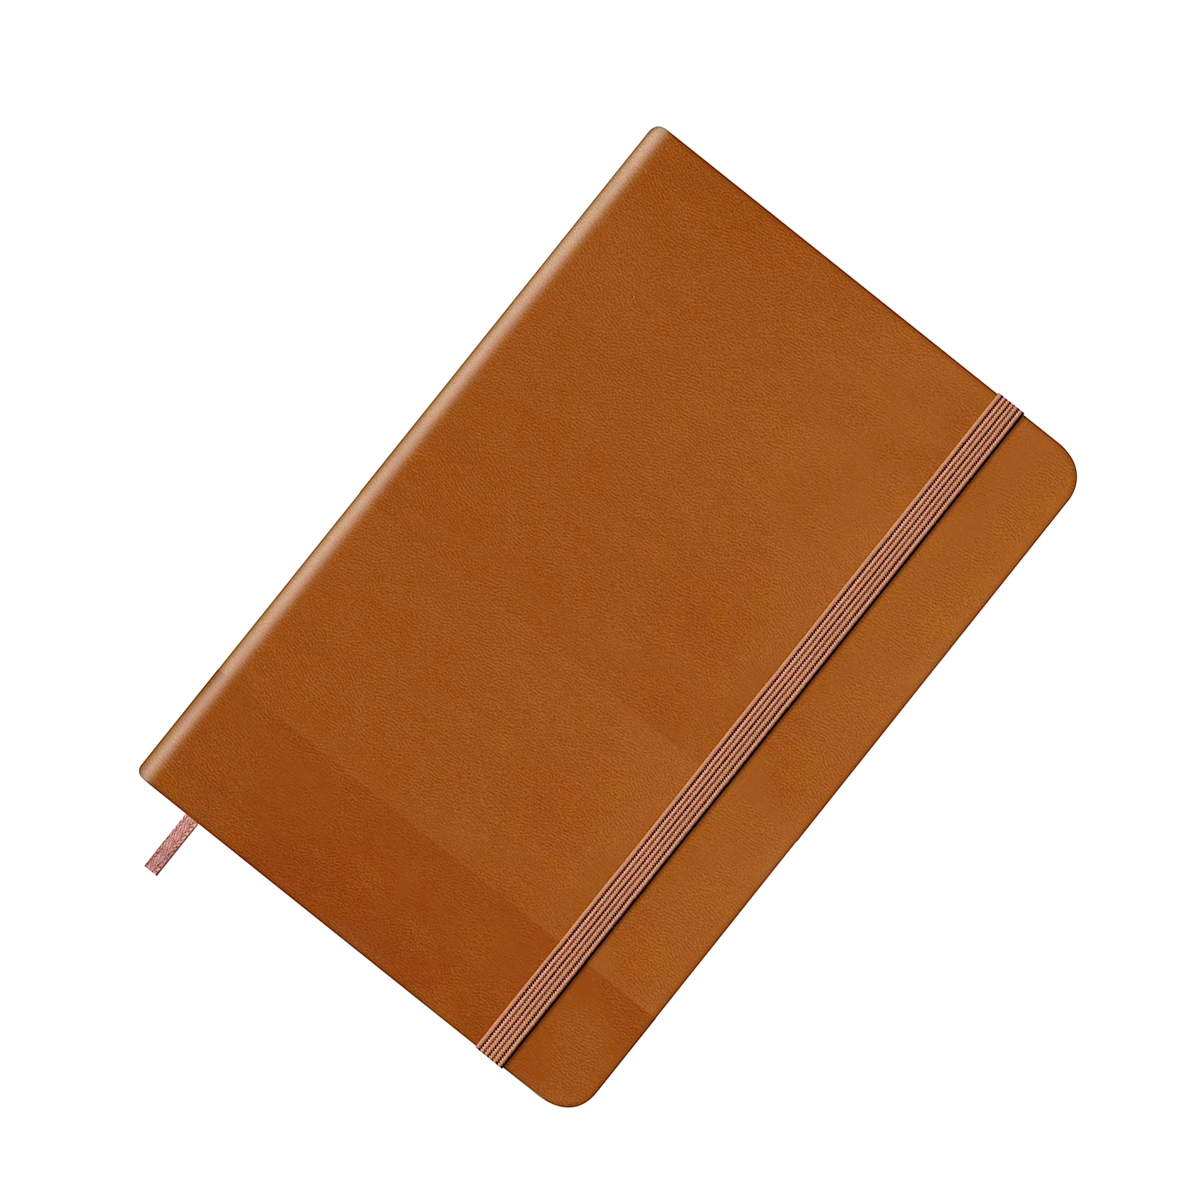 Olmecs PU Soft Leather Covered Notebook With Elastic Strap - Light Brown